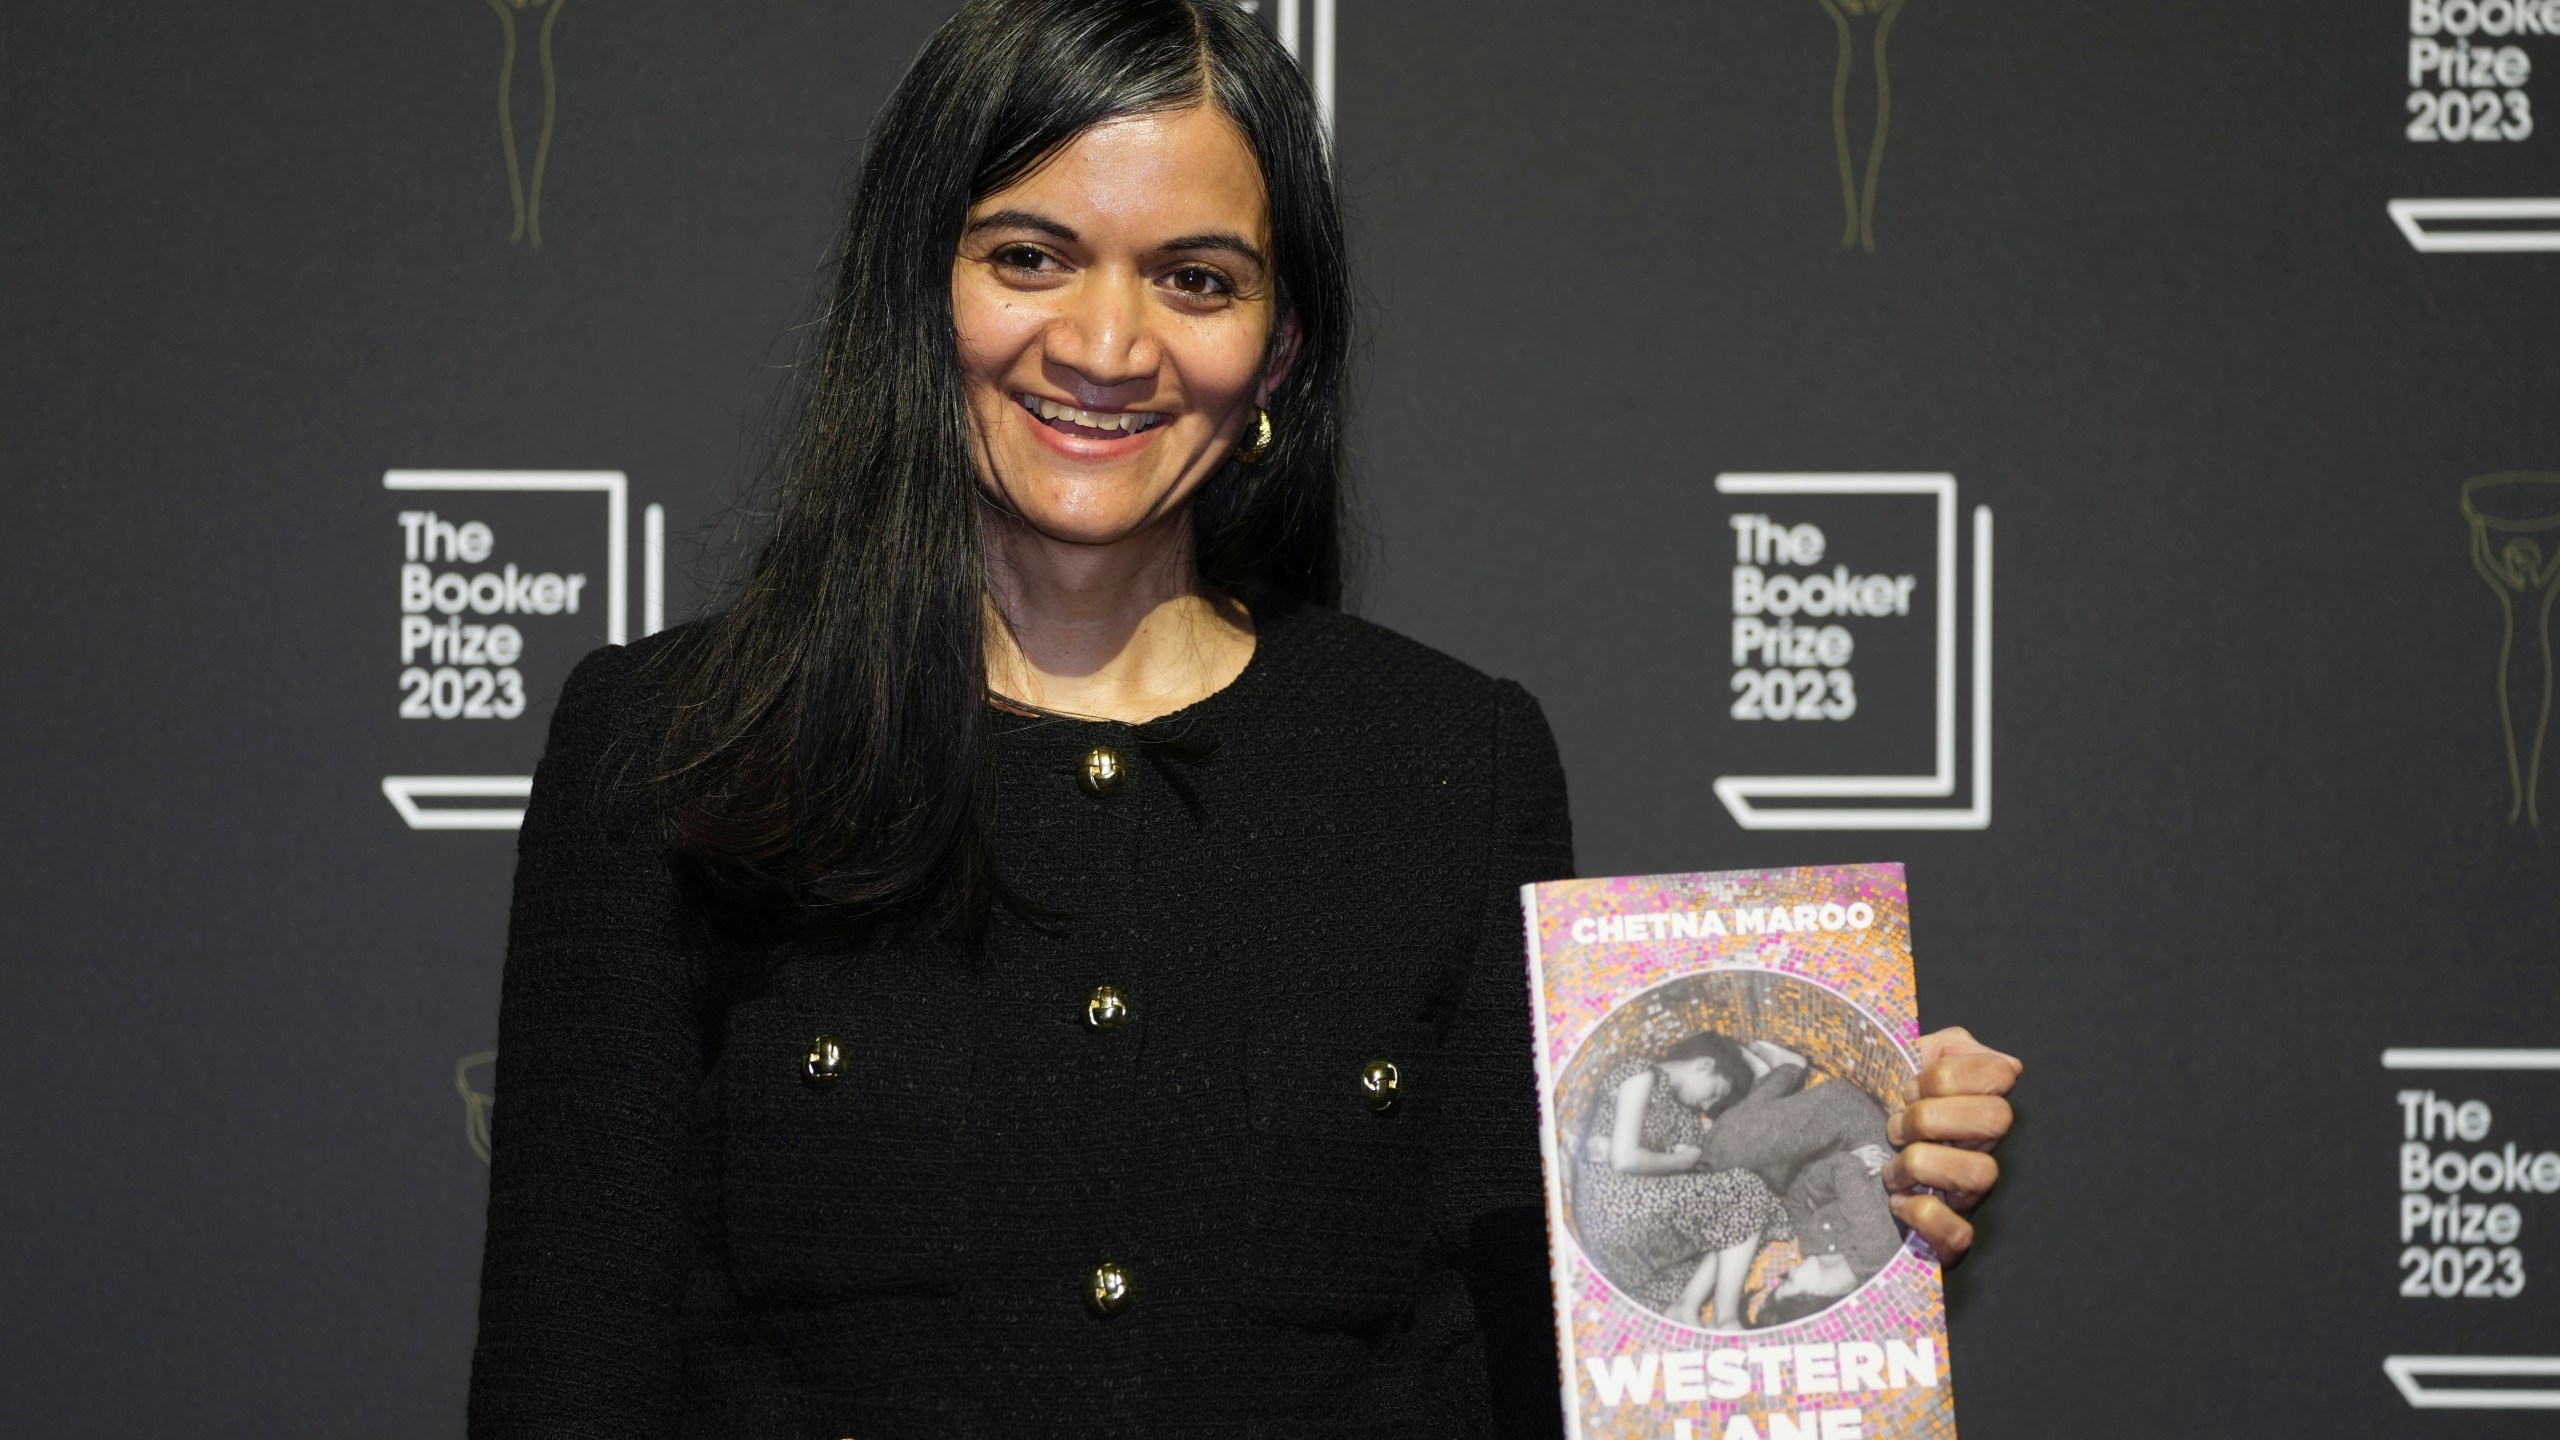 FILE - British author Chetna Maroo poses with her book "Western Lane" during a photocall with the six shortlisted authors for the Booker Prize 2023, in London, Thursday, Nov. 23, 2023 ahead of the award ceremony on Nov. 26 in London. Novels that give voice to the often unheard stories of migrants around the world are among the nominees for the 2024 Women’s Prize for Fiction on Tuesday, March 5, 2024. One of the debut novelists, British author Chetna Maroo, was a finalist for the 2023 Booker Prize with “Western Lane,” the story of a squash prodigy grappling with family tragedy. (AP Photo/Kin Cheung, File)